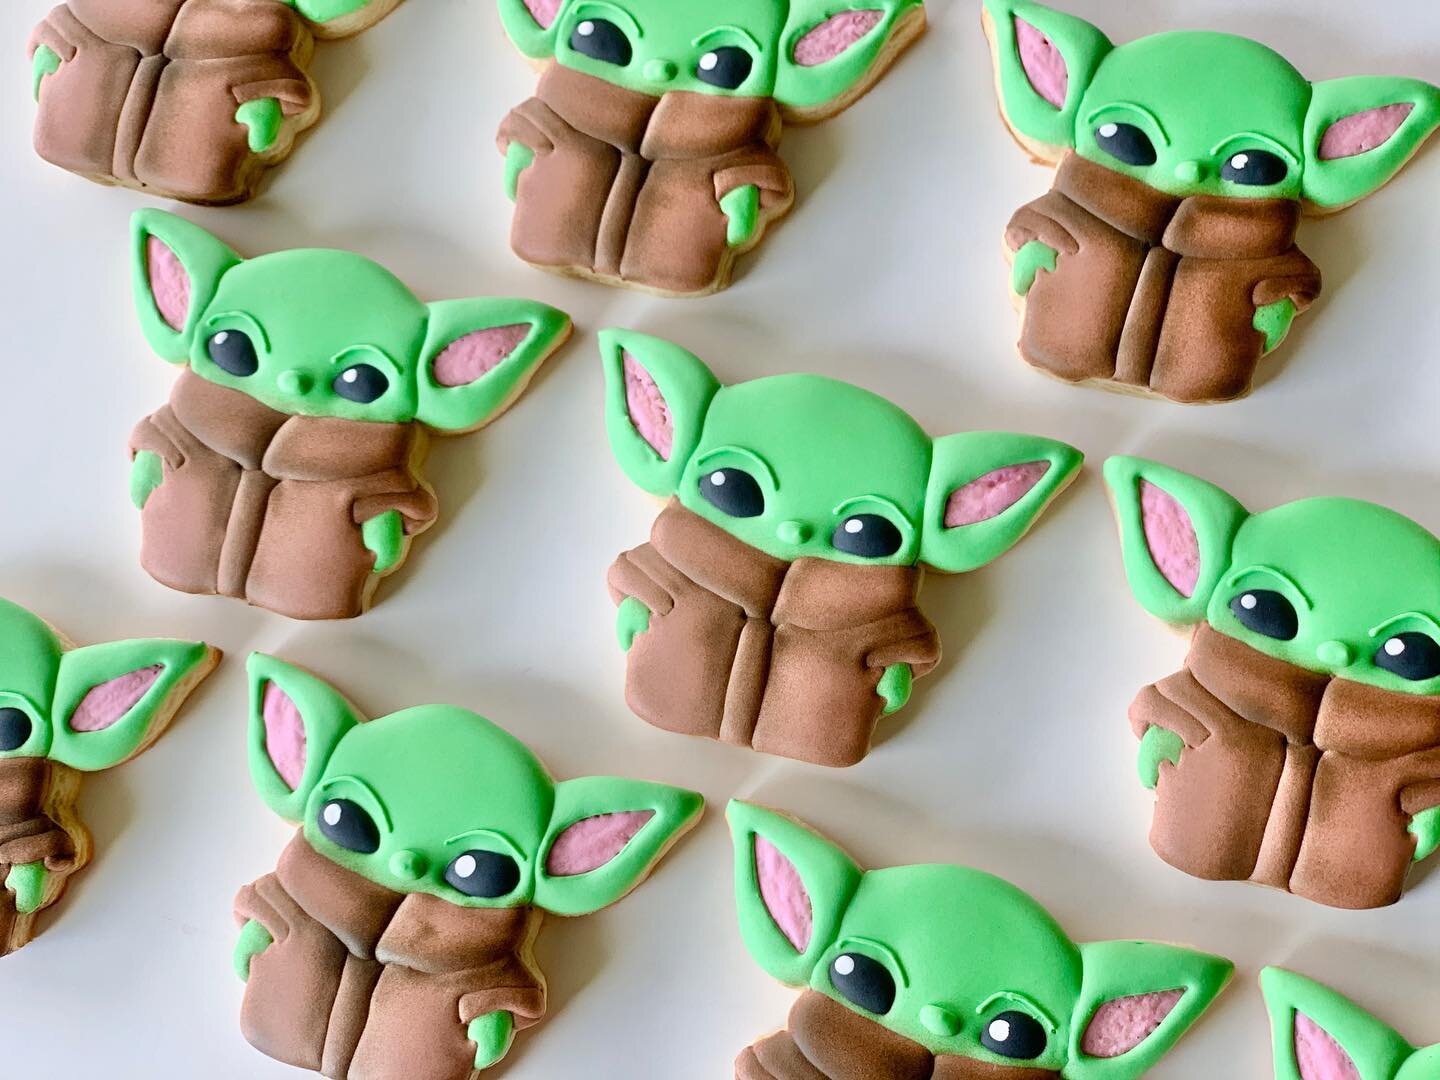 May the 4th be with you.
.
.
.
.
#starwars #maythe4thbewithyou #maythe4th #maytheforcebewithyou #yoda #grogu #babyyoda #starwarscookies #grogucookies #babyyodacookies #yodacookies #sugarcookies #tampacookies #tampasugarcookies #tampa #tampabay #flori